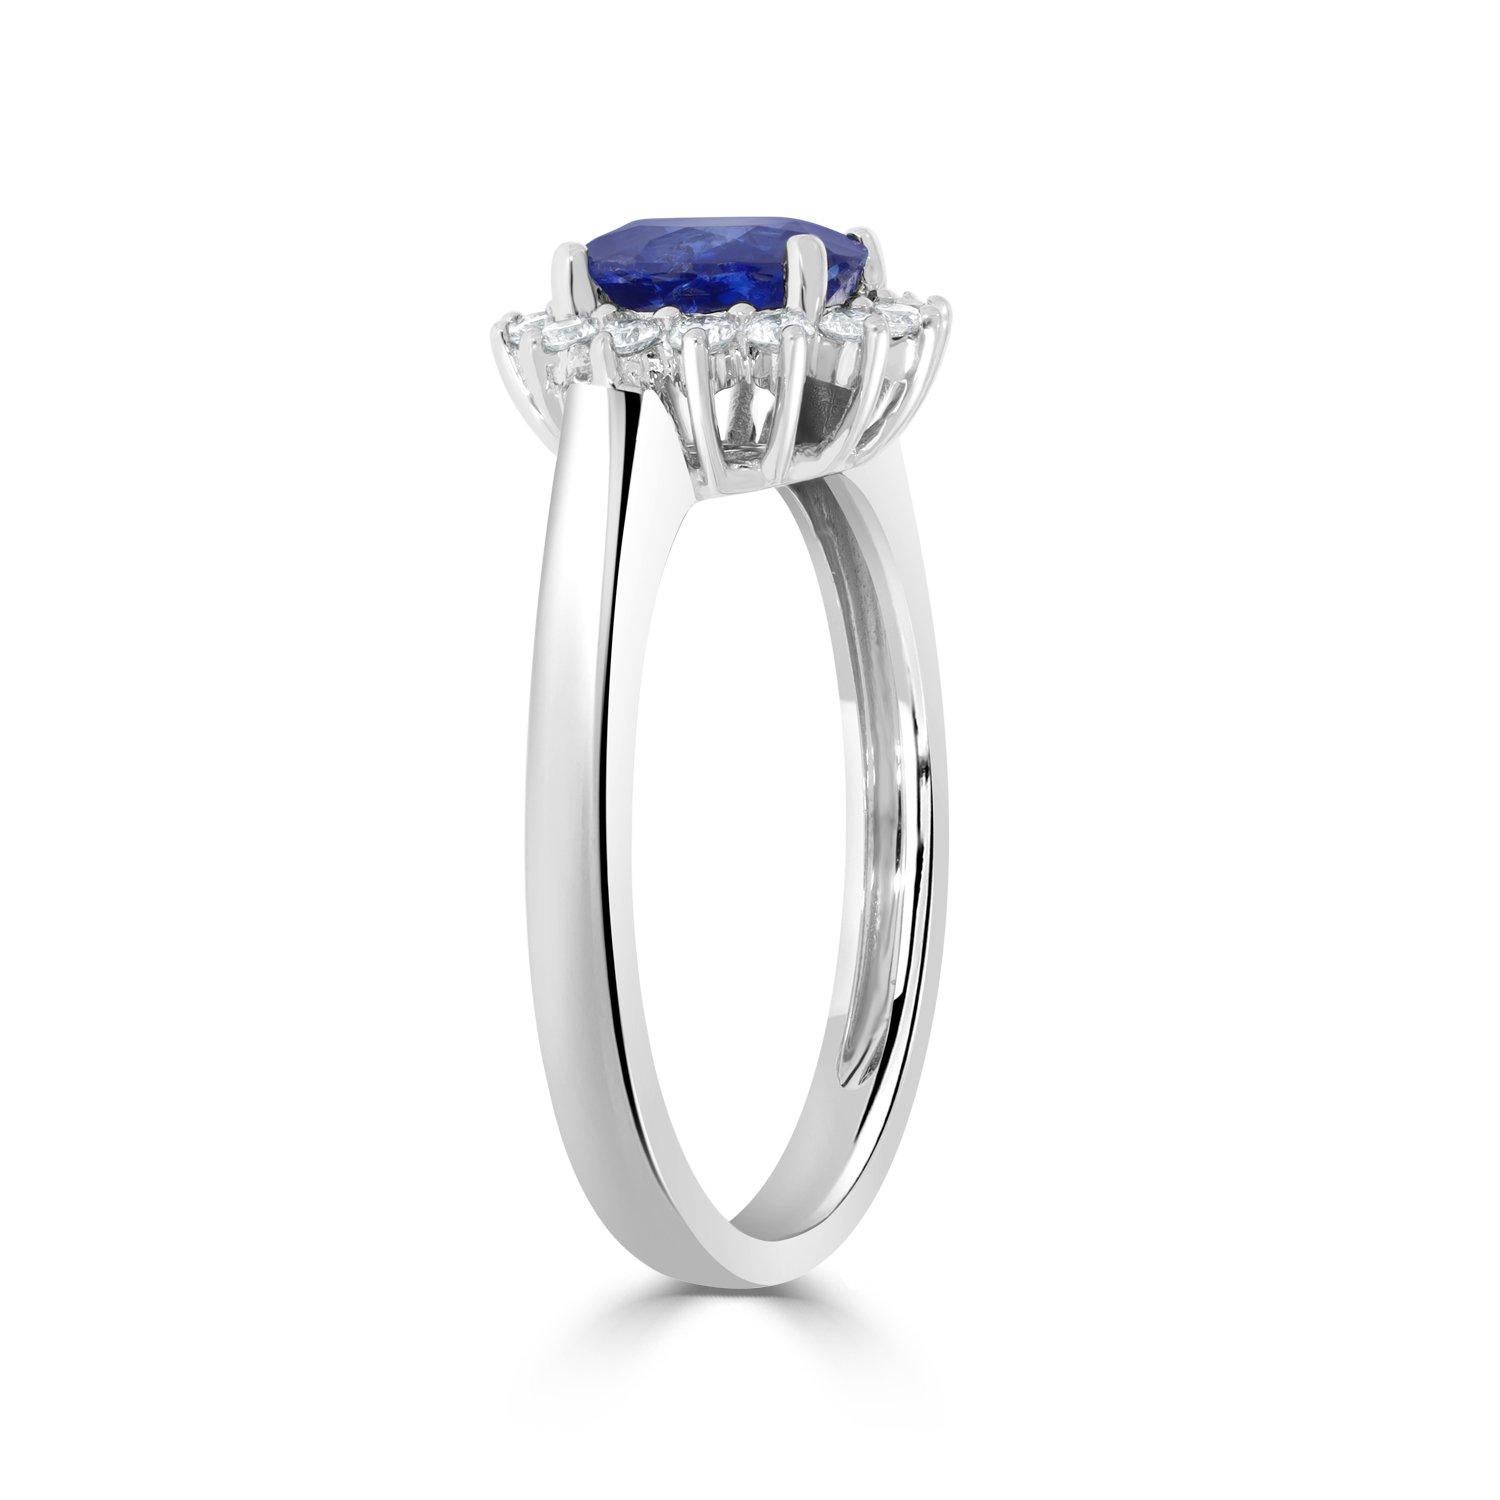 Women's 1.16ct Sapphire Ring with 0.23Tct Diamonds Set in 14K White Gold For Sale